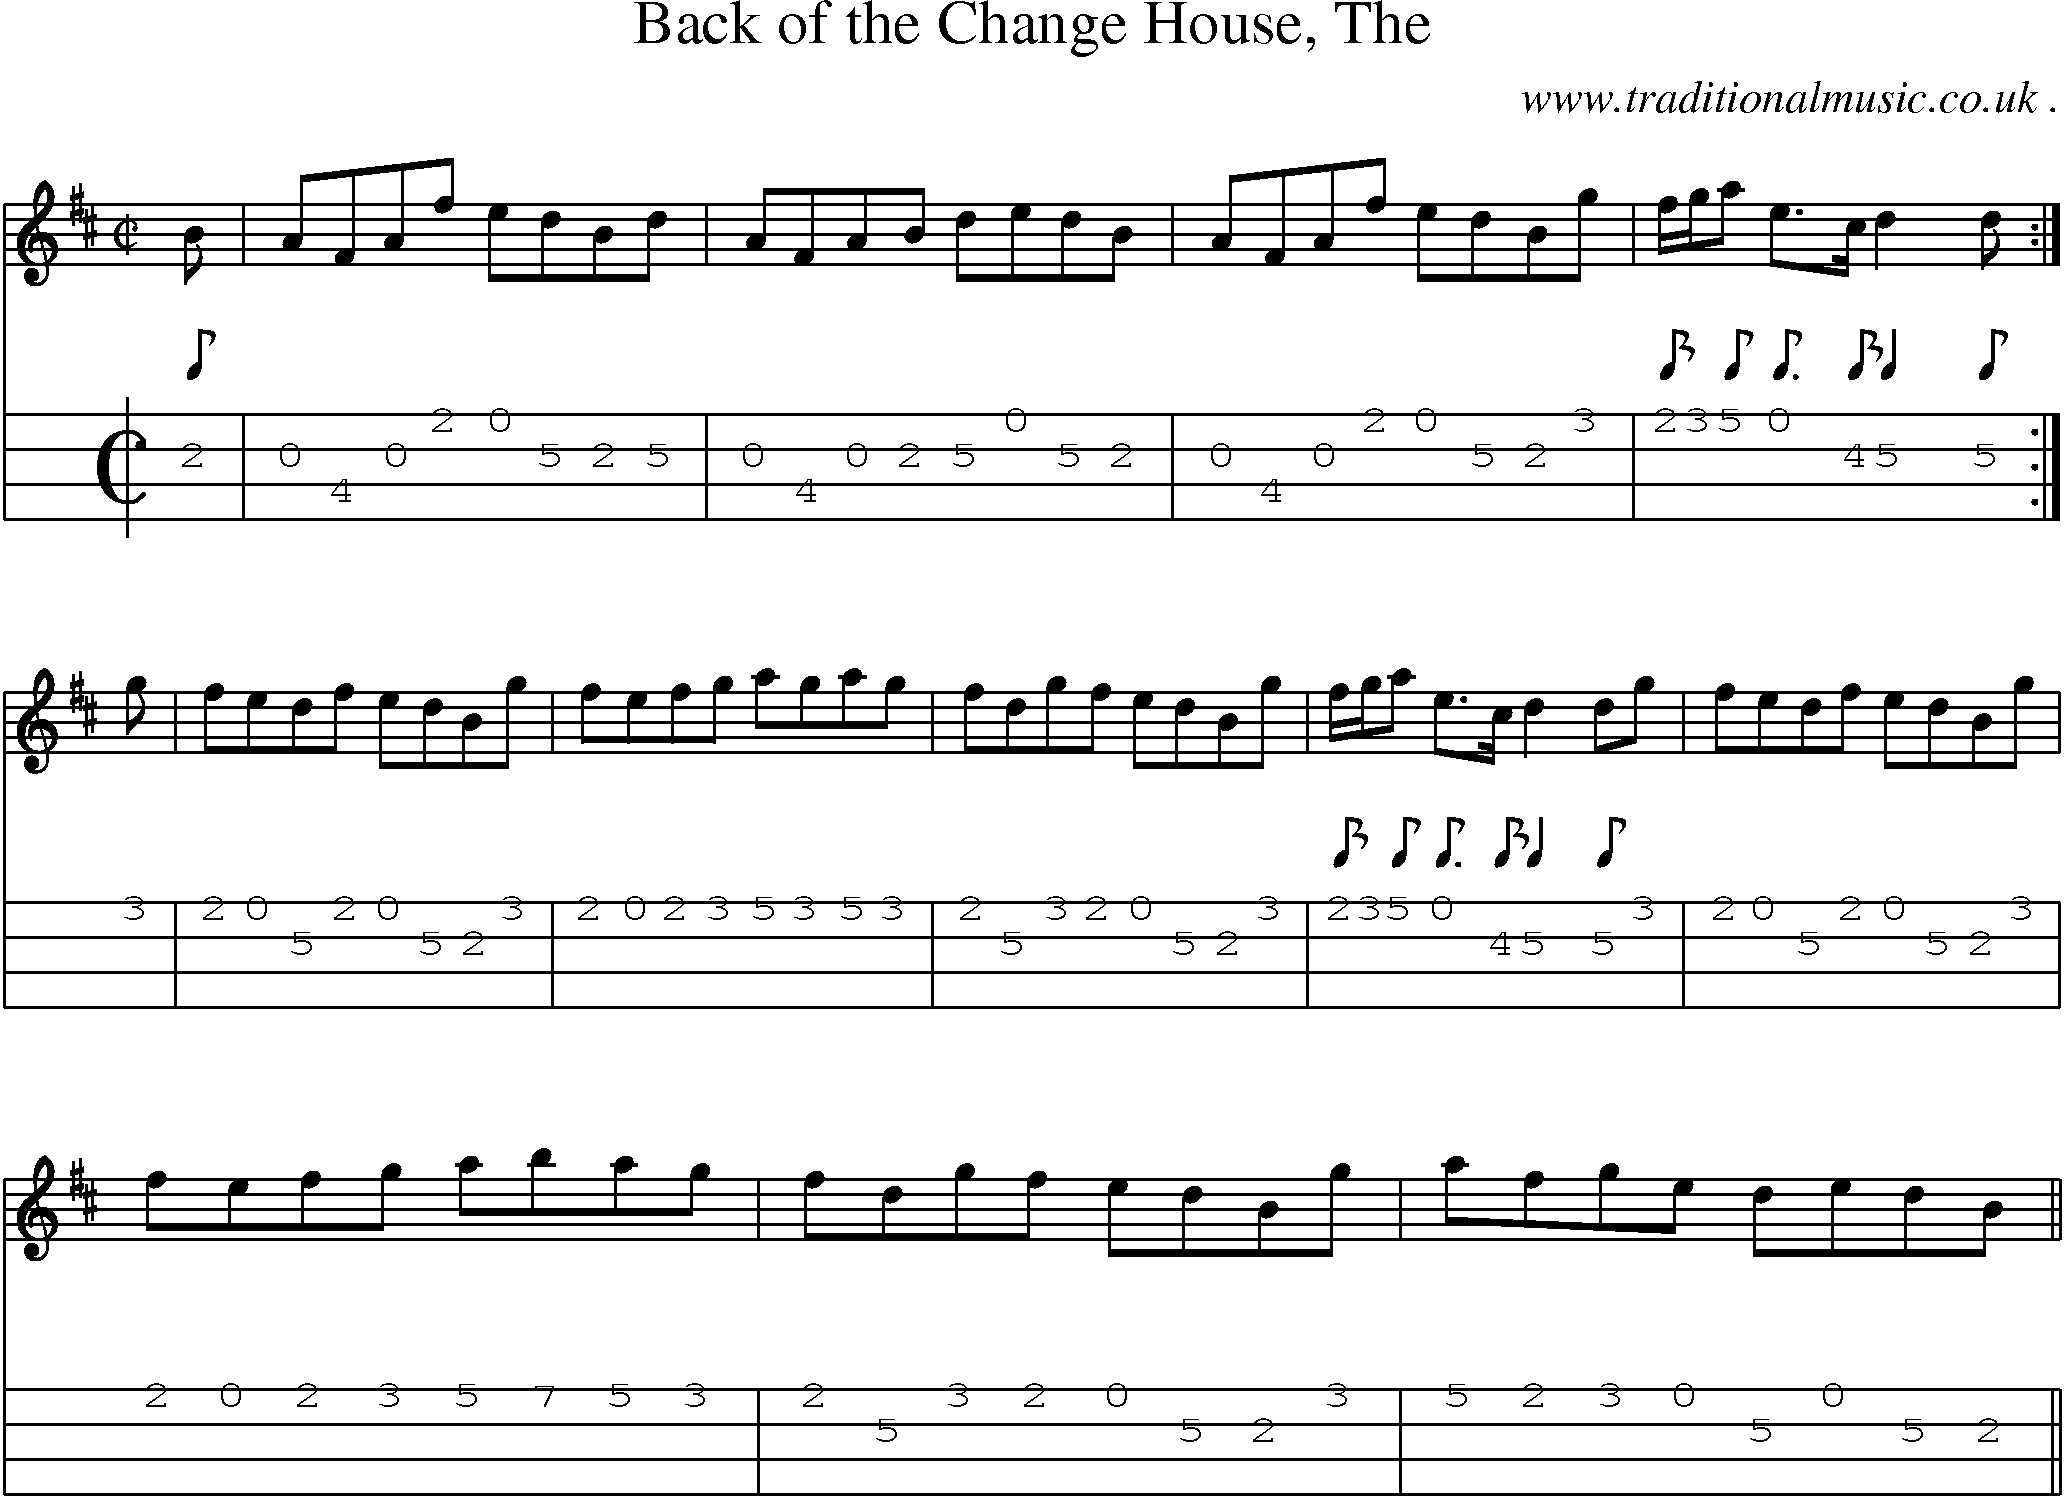 Sheet-music  score, Chords and Mandolin Tabs for Back Of The Change House The